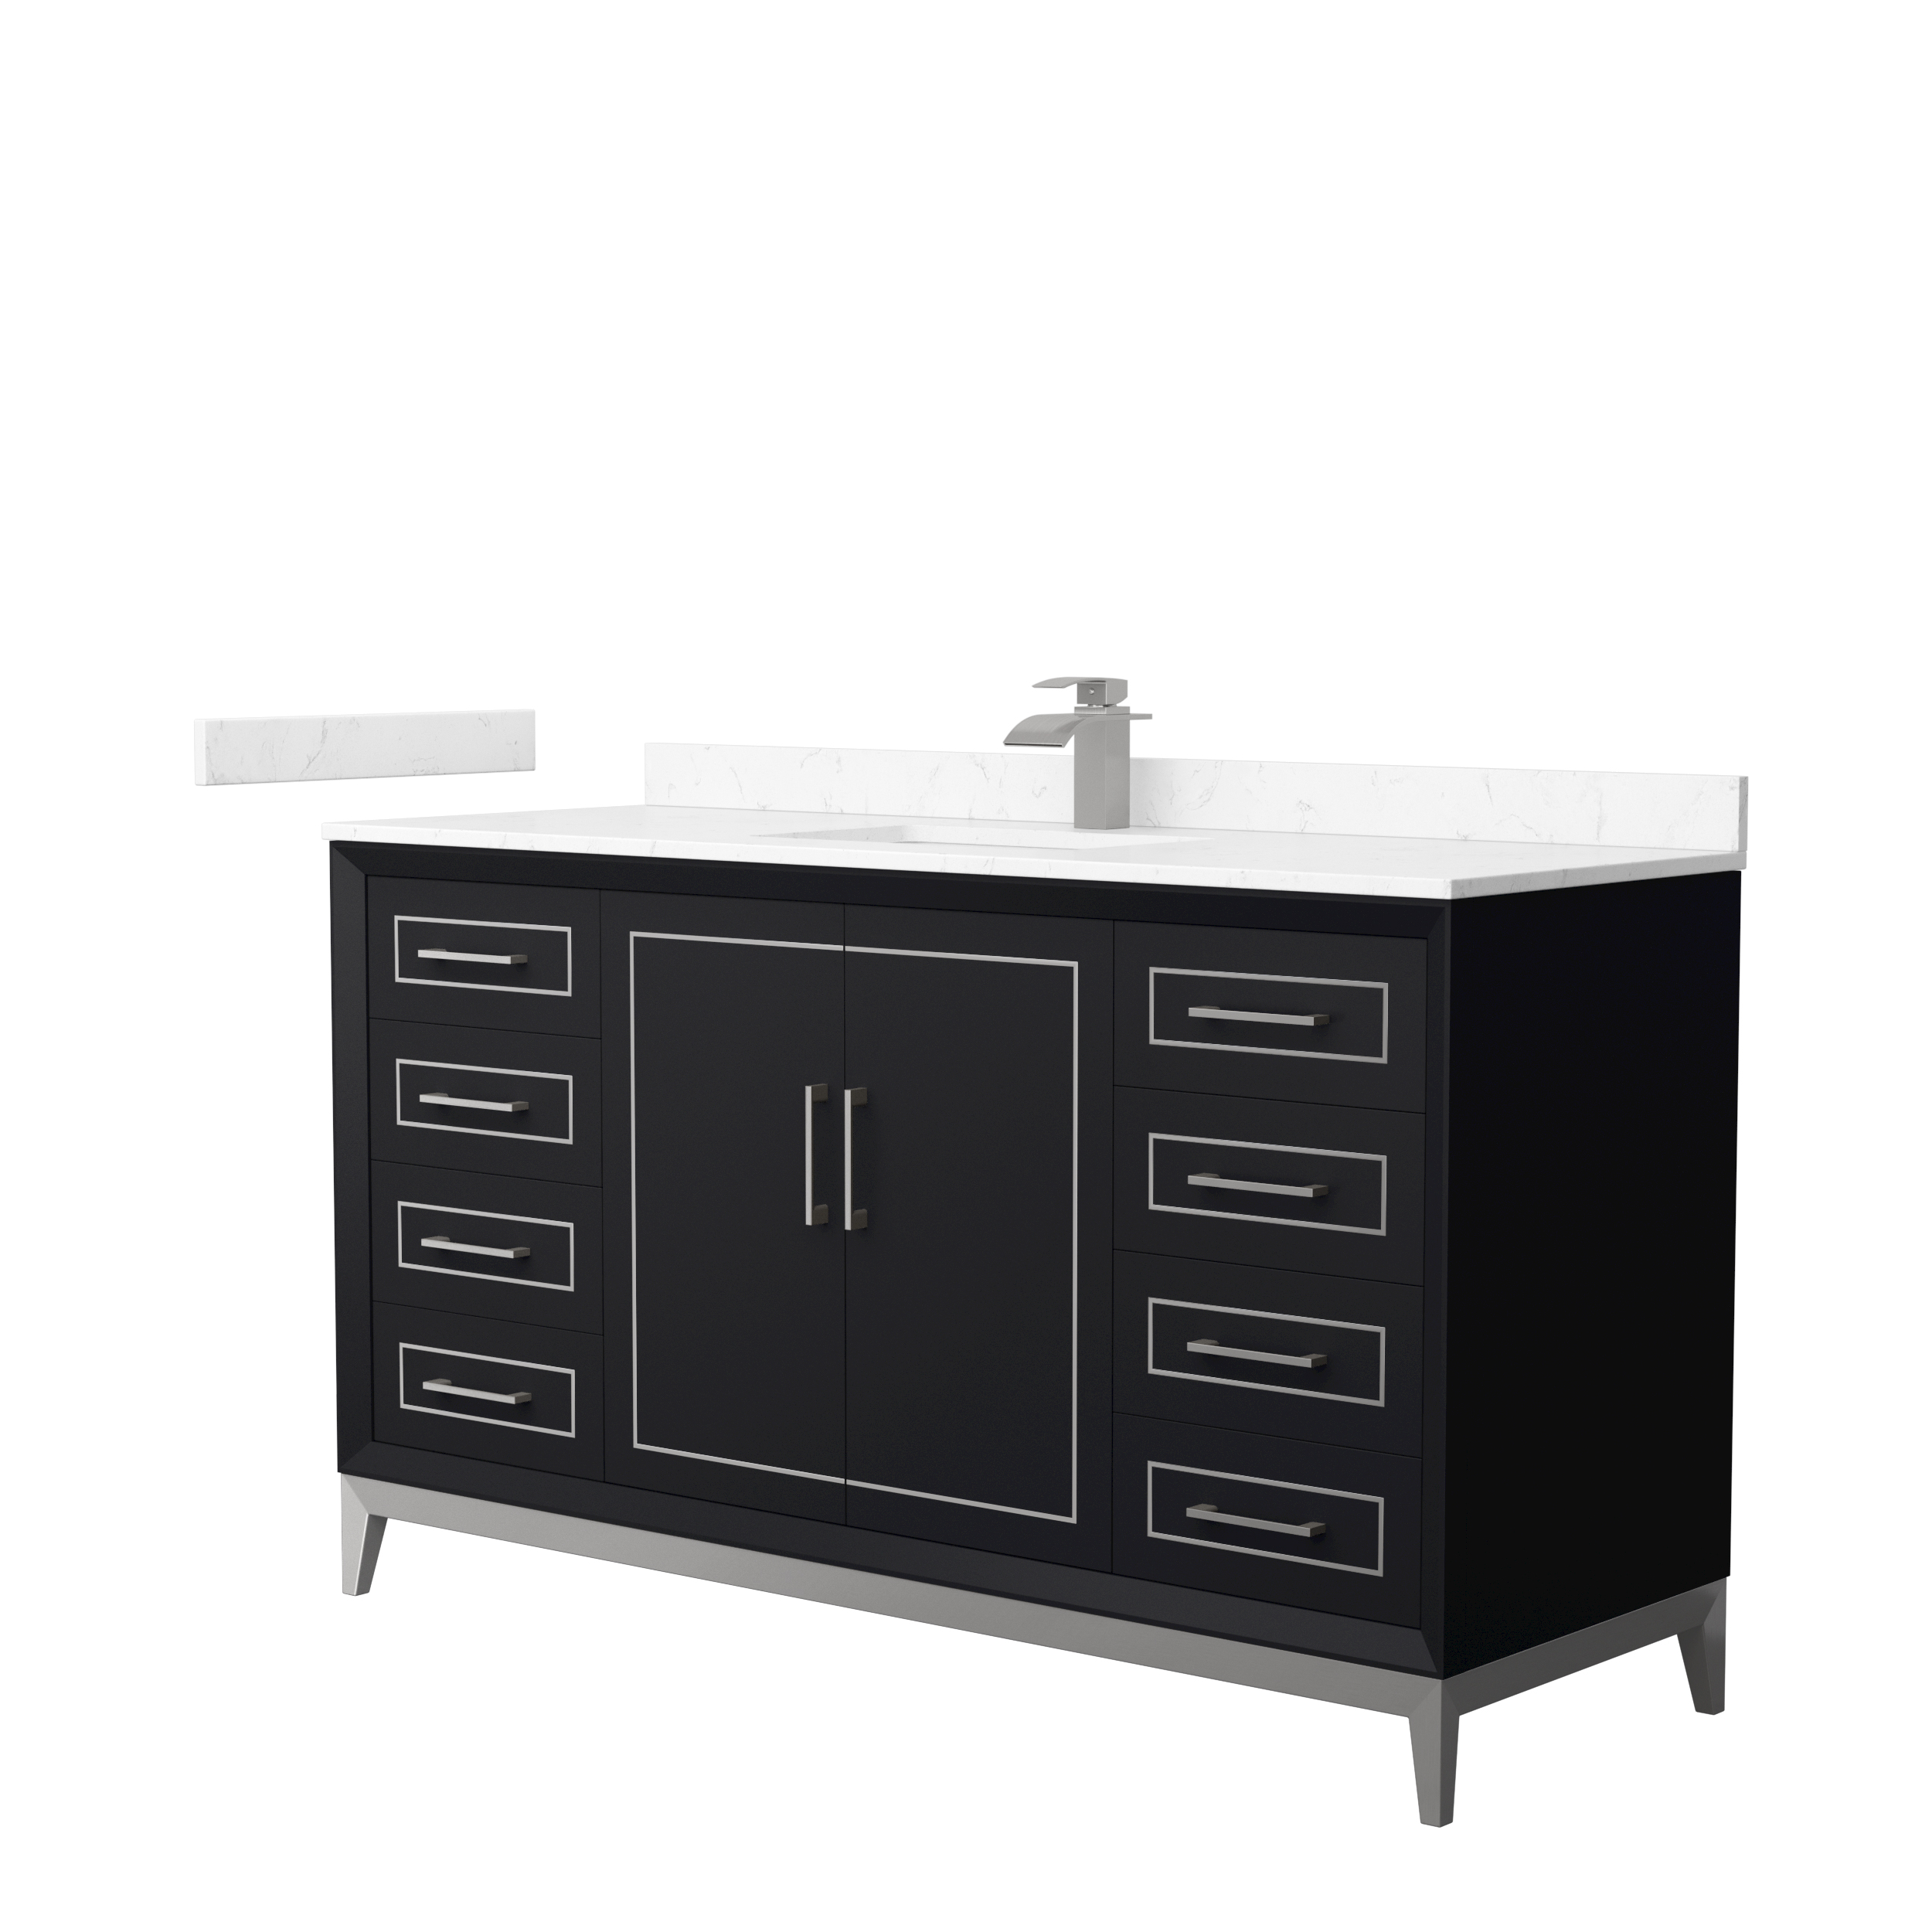 60" Single Bathroom Vanity with 4 Color Options, 3 Countertop Options and 3 Hardware Options